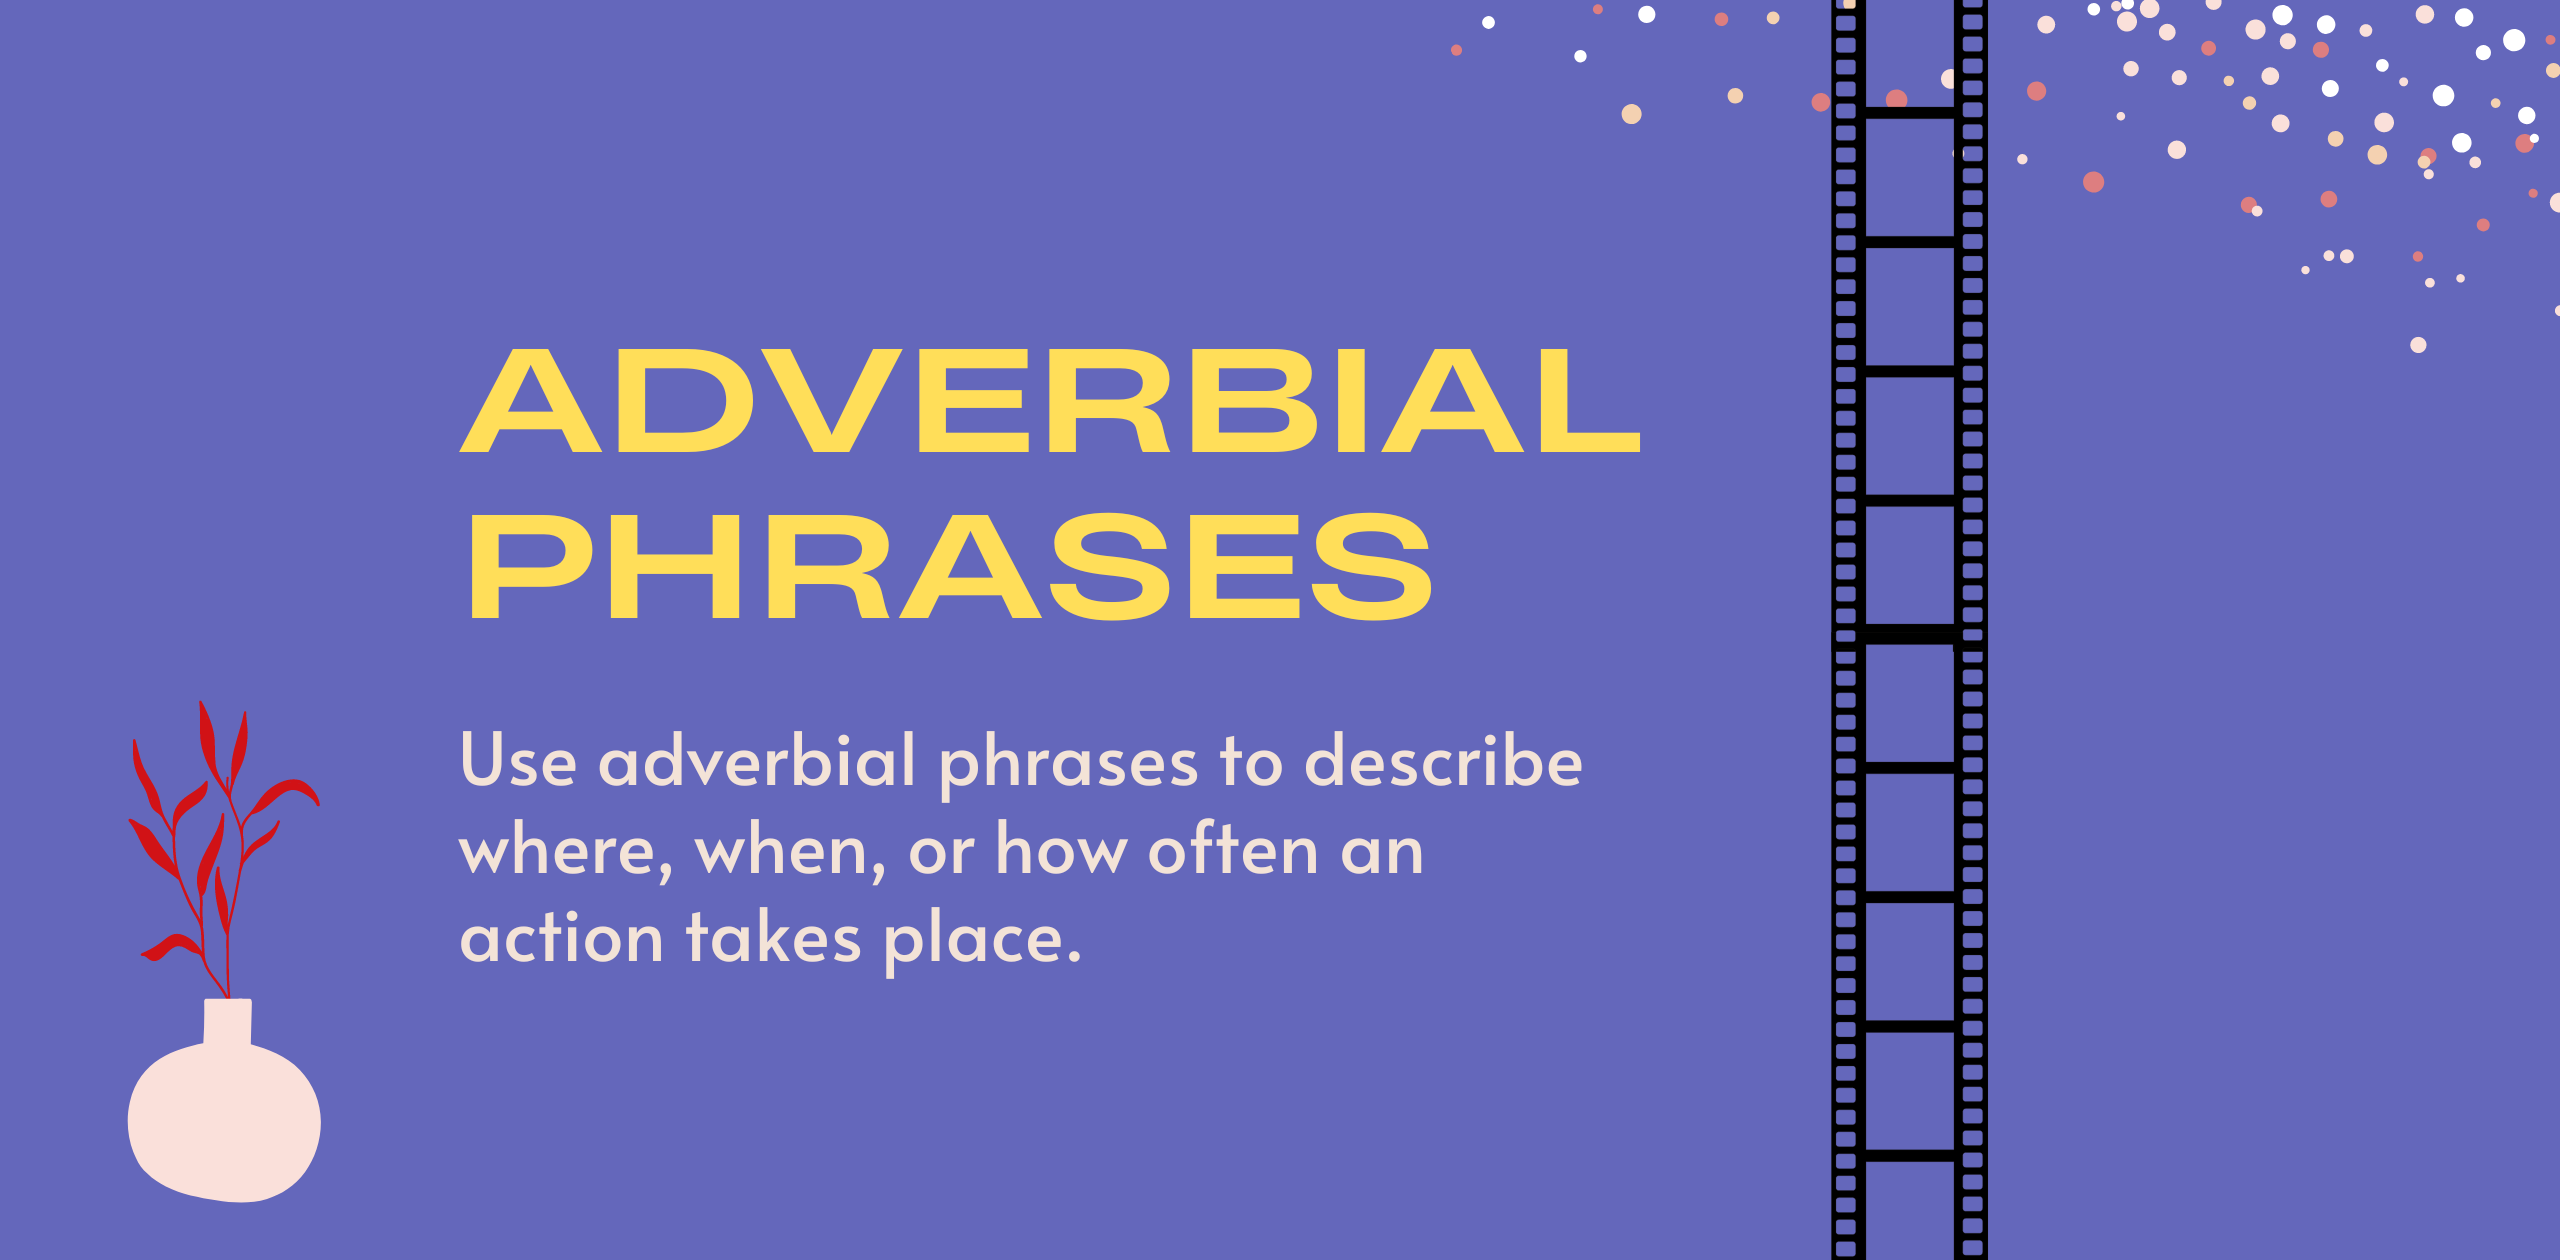 Adverbial phrases in English